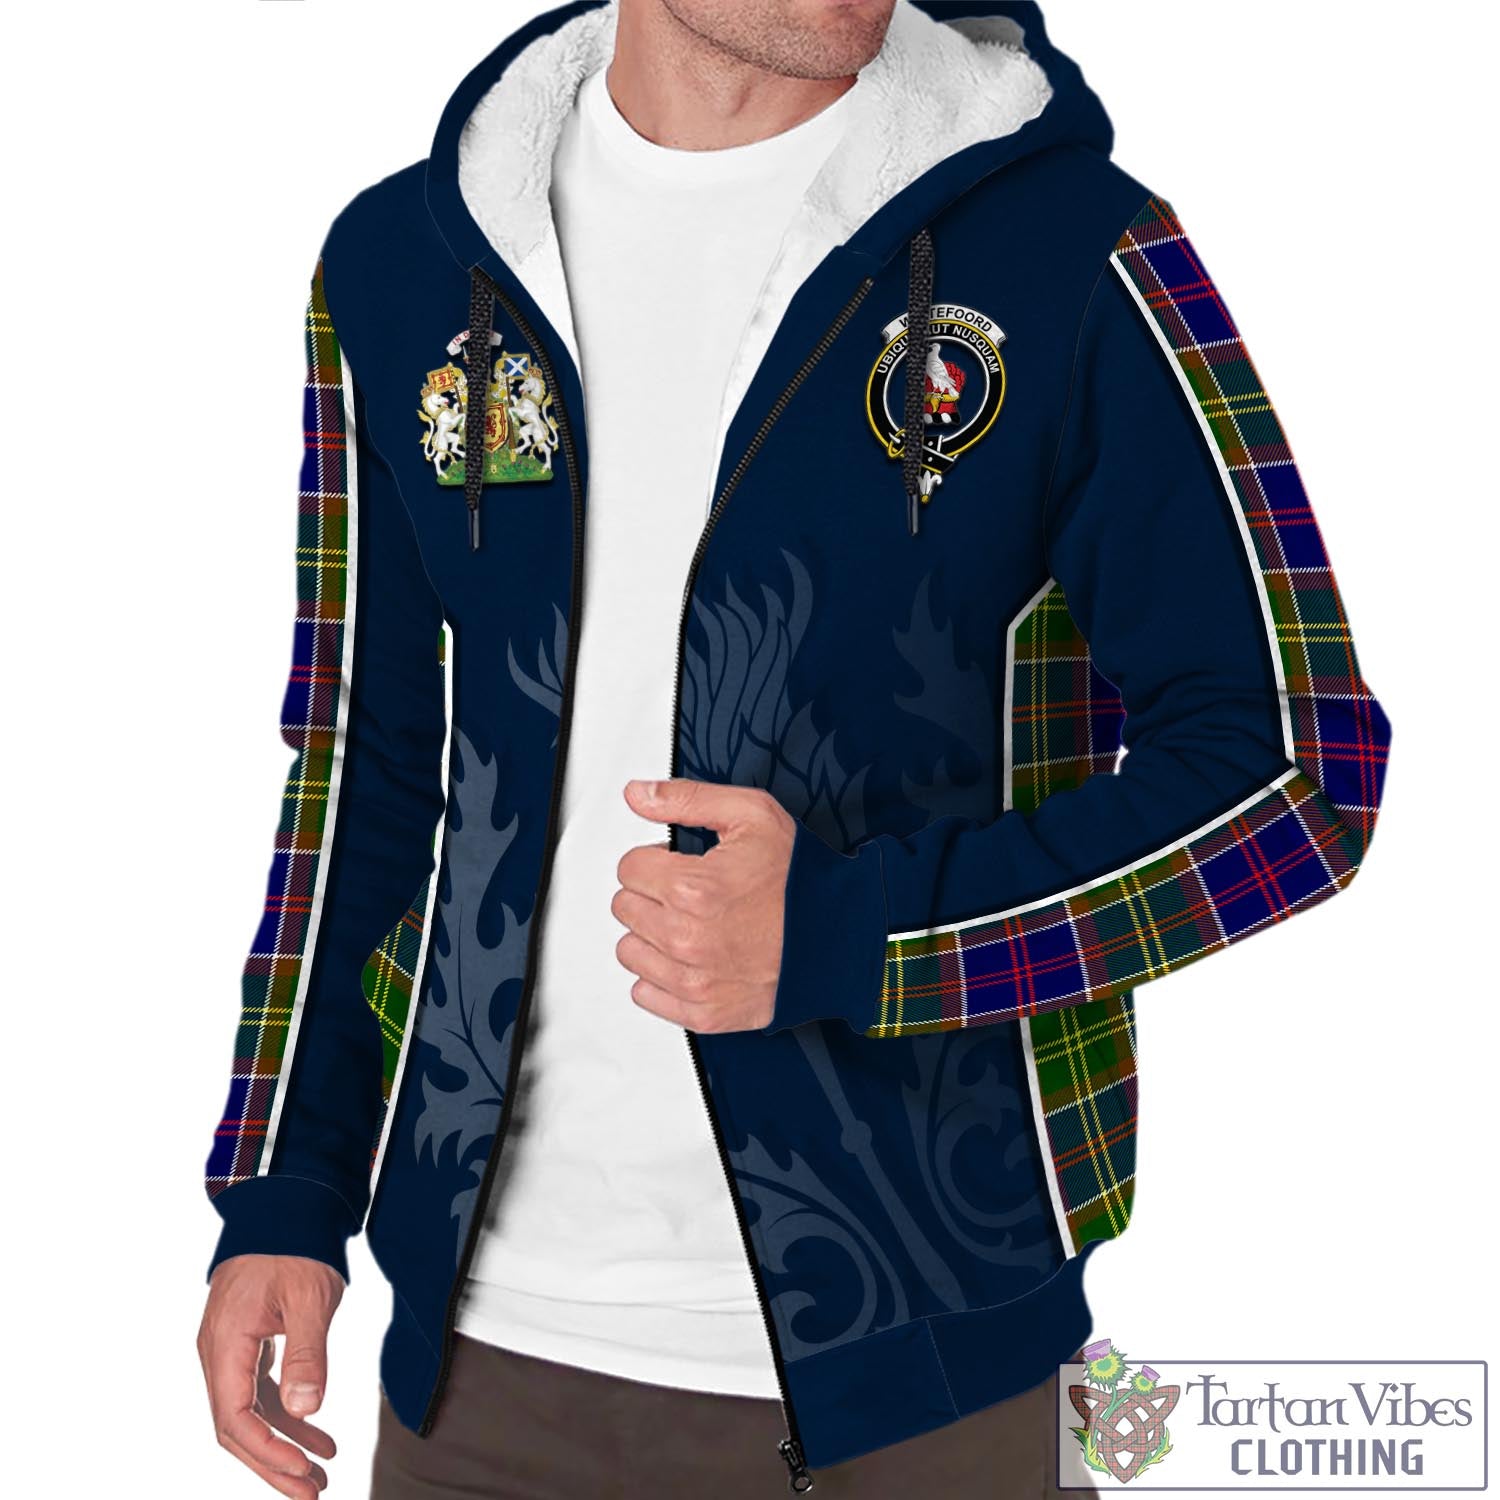 Tartan Vibes Clothing Whitefoord Modern Tartan Sherpa Hoodie with Family Crest and Scottish Thistle Vibes Sport Style